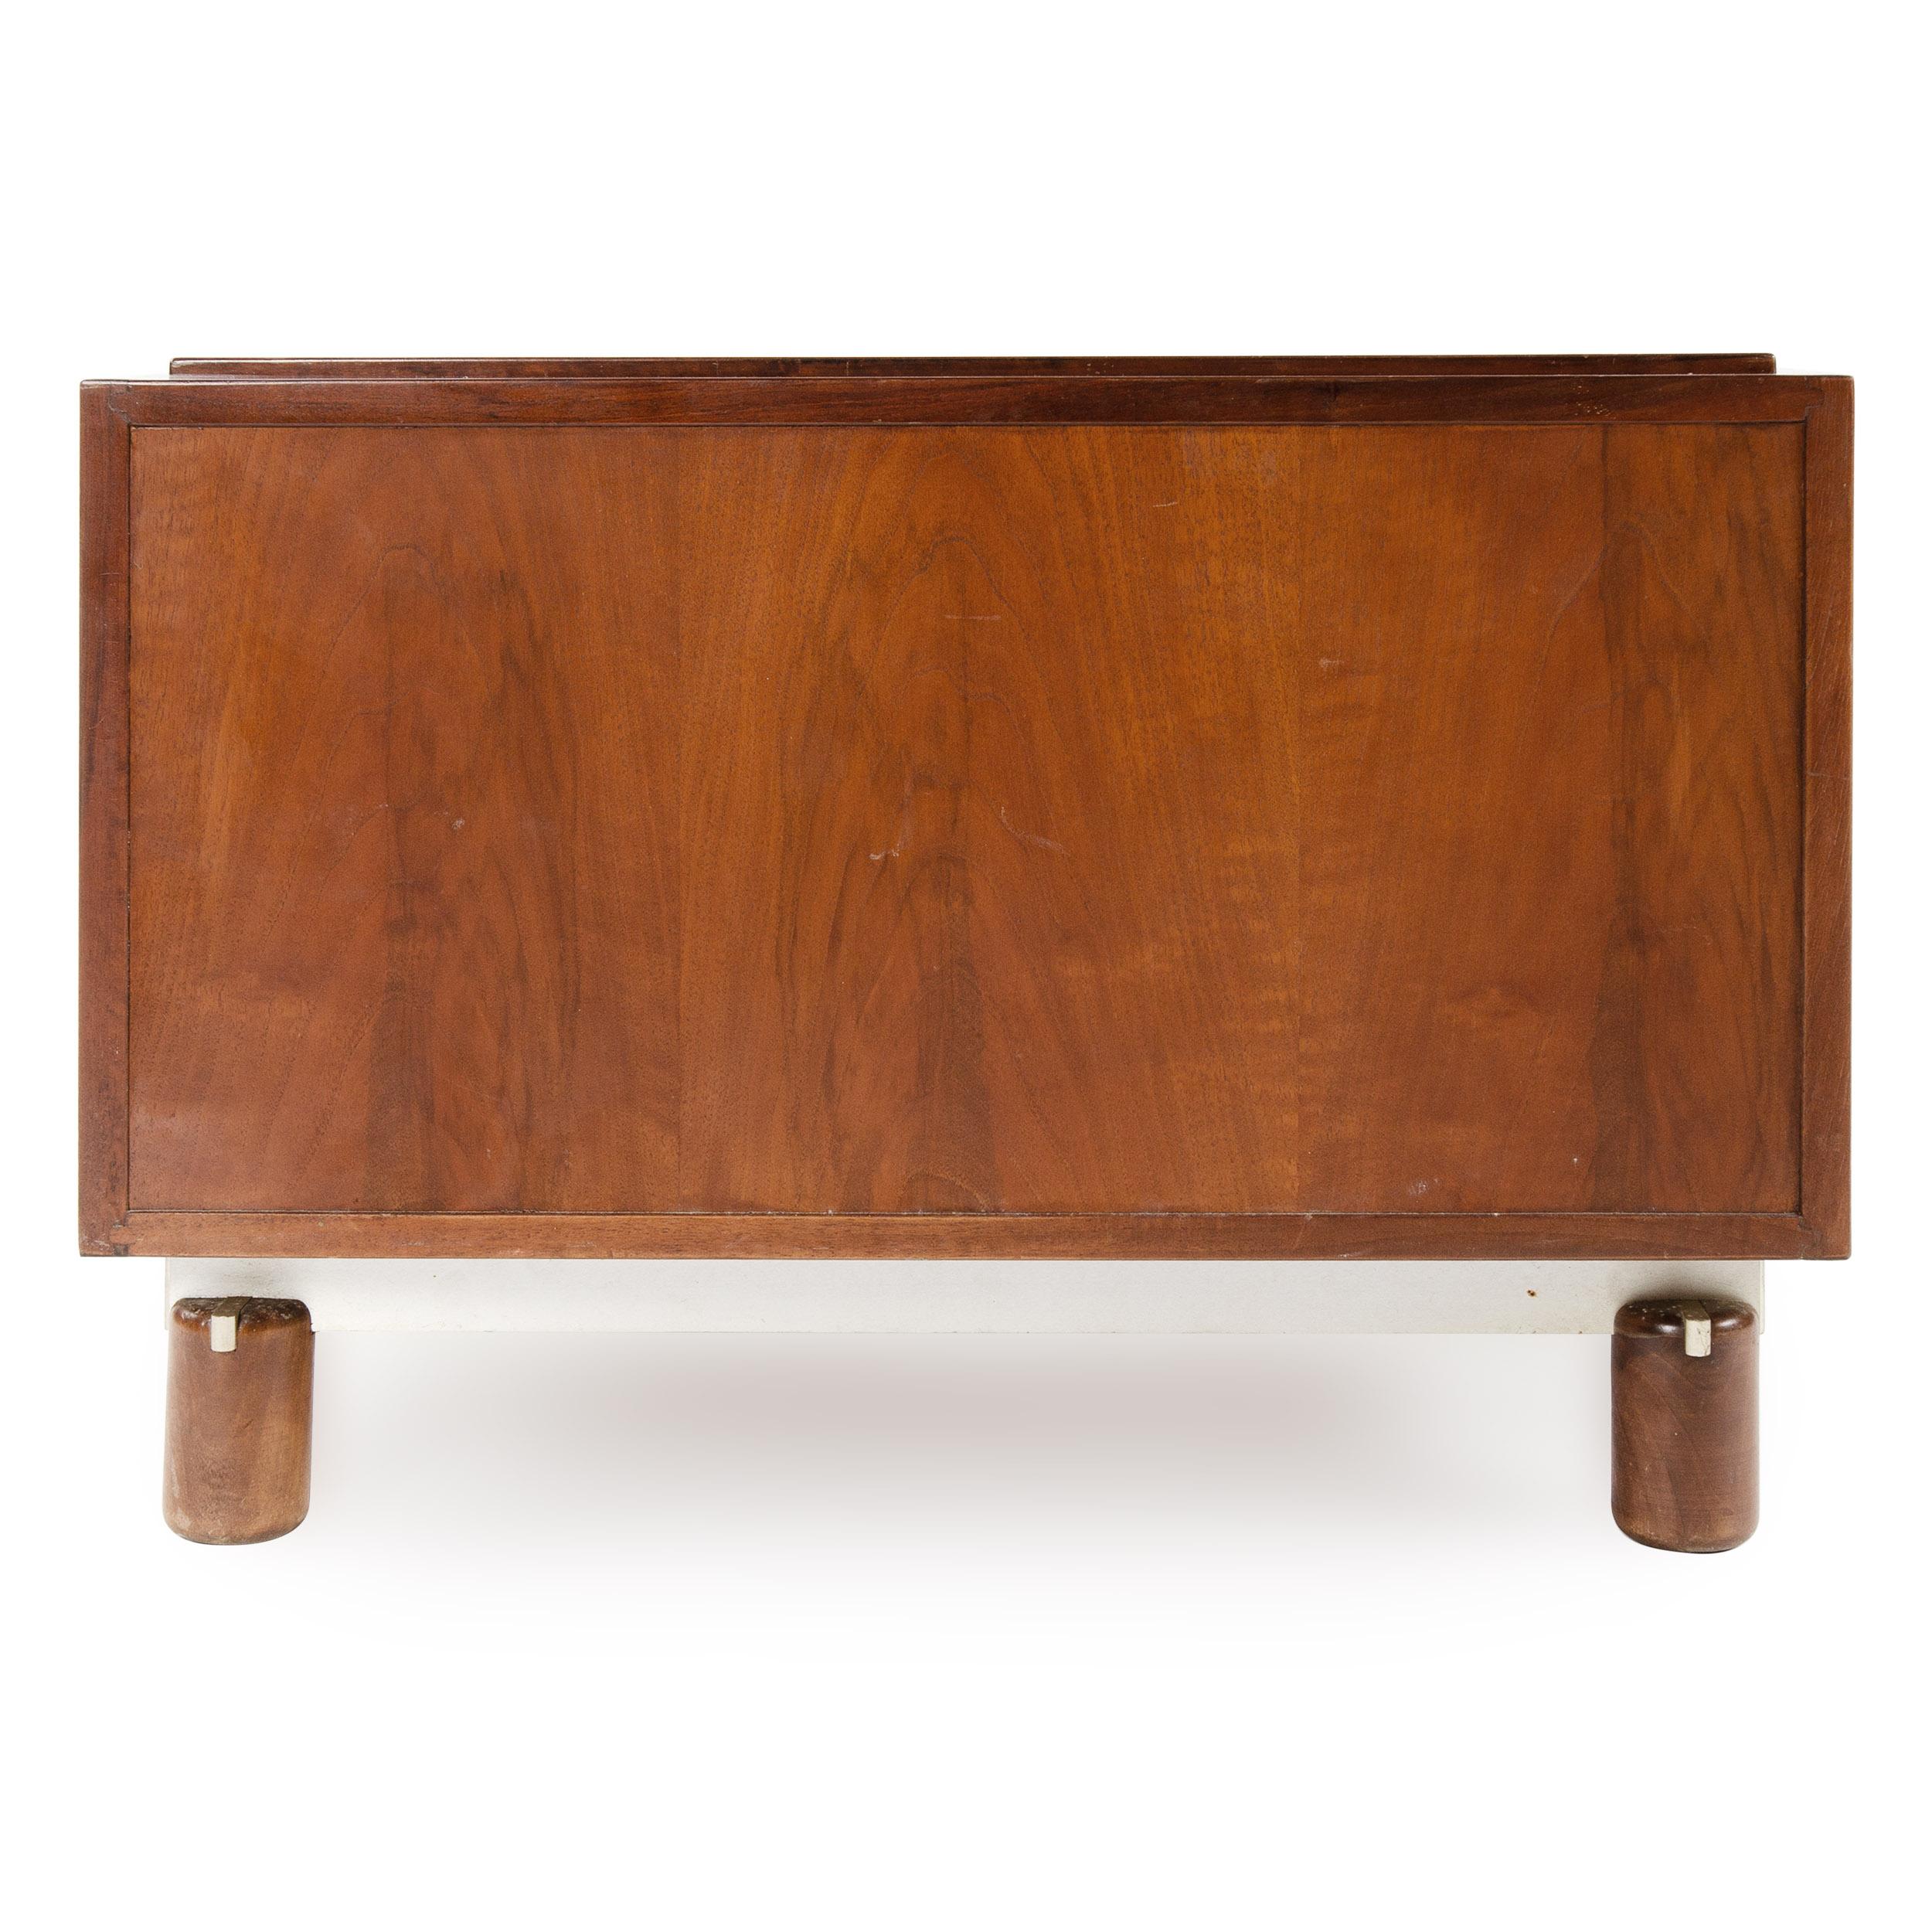 Mid-20th Century 1950s Italian Walnut Cabinet / End Table by Gianfranco Frattini for Bernini For Sale